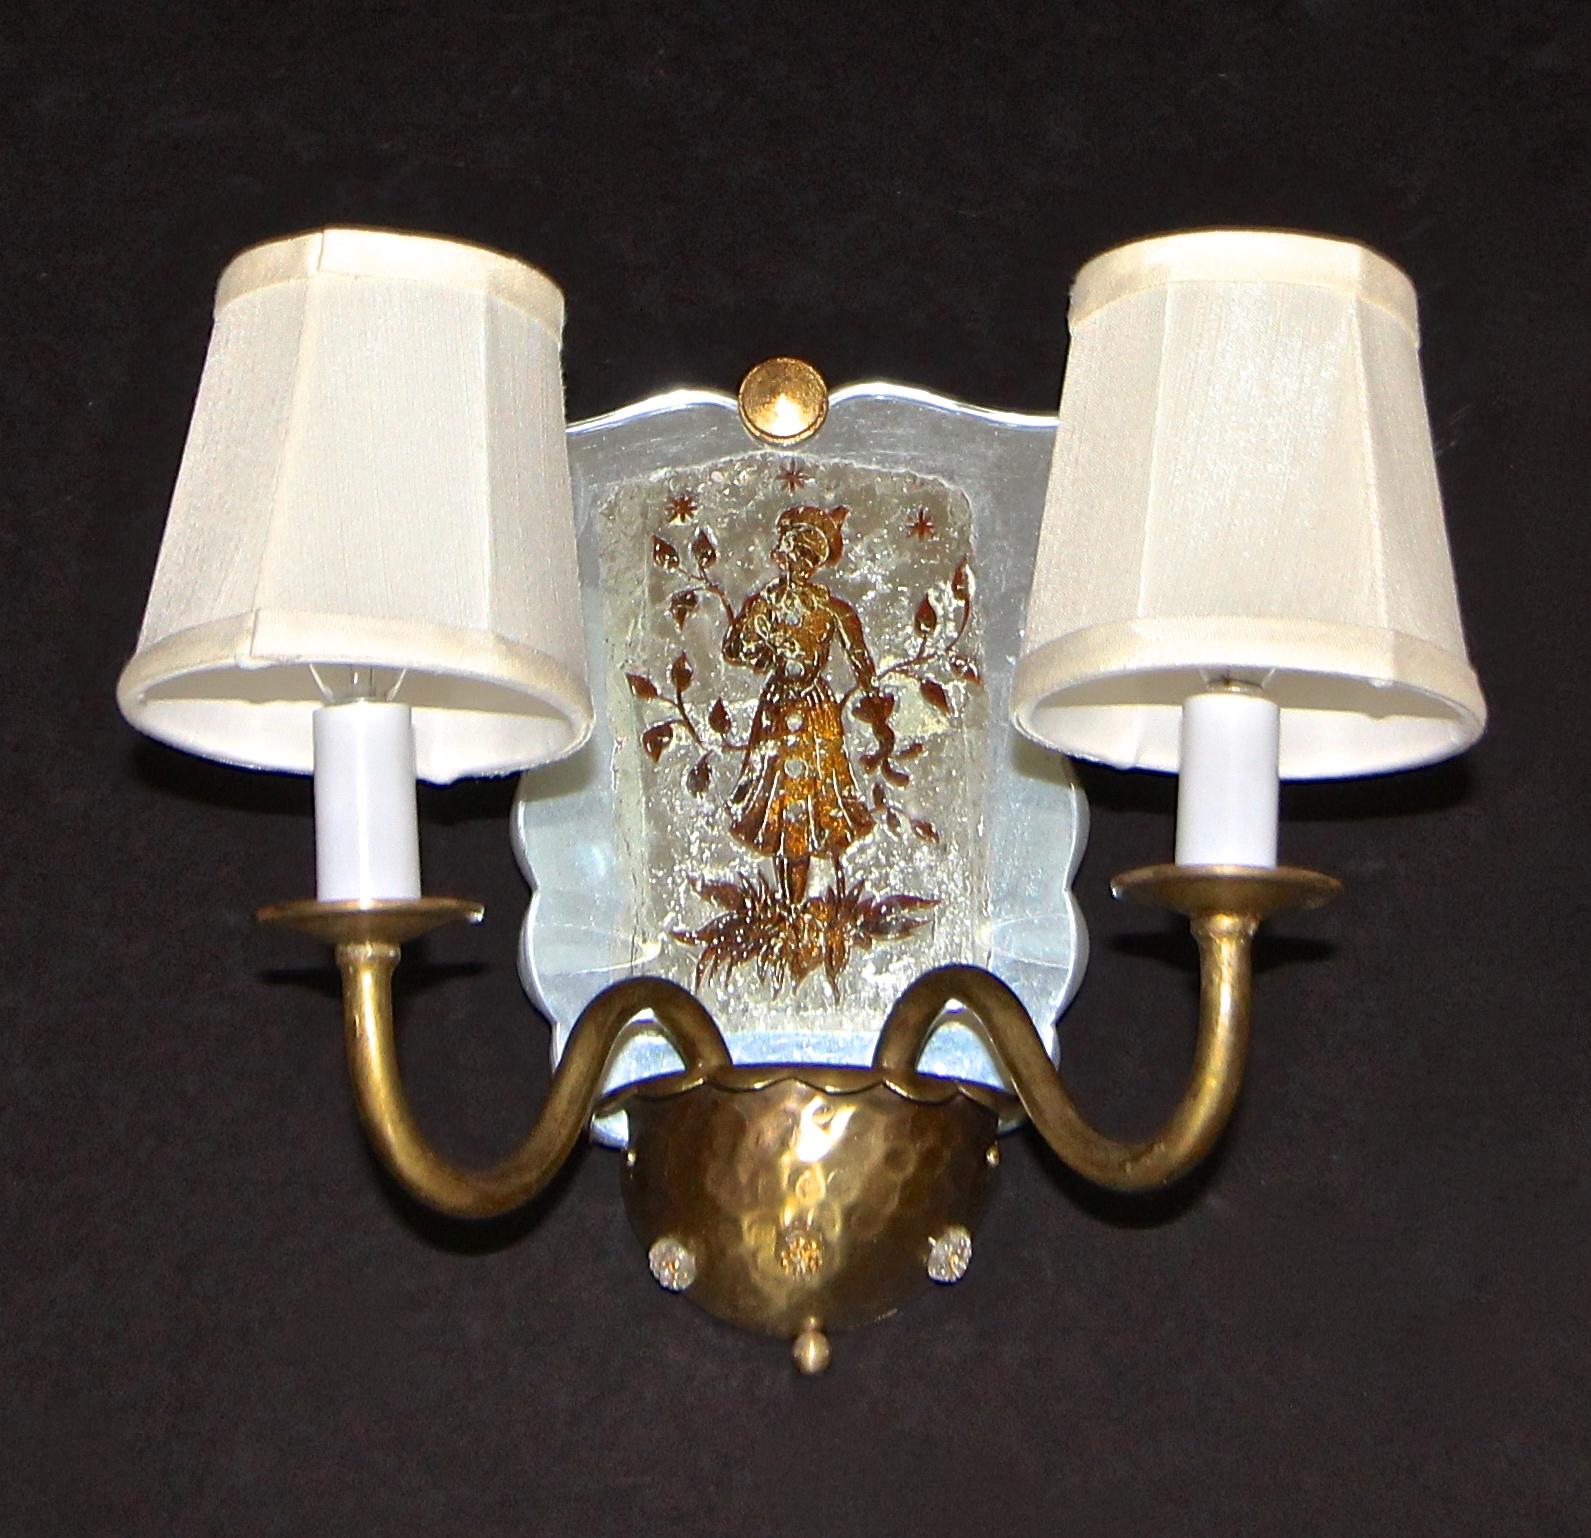 Pair of Venetian Italian Mirrored Wall Light Sconces In Good Condition For Sale In Palm Springs, CA